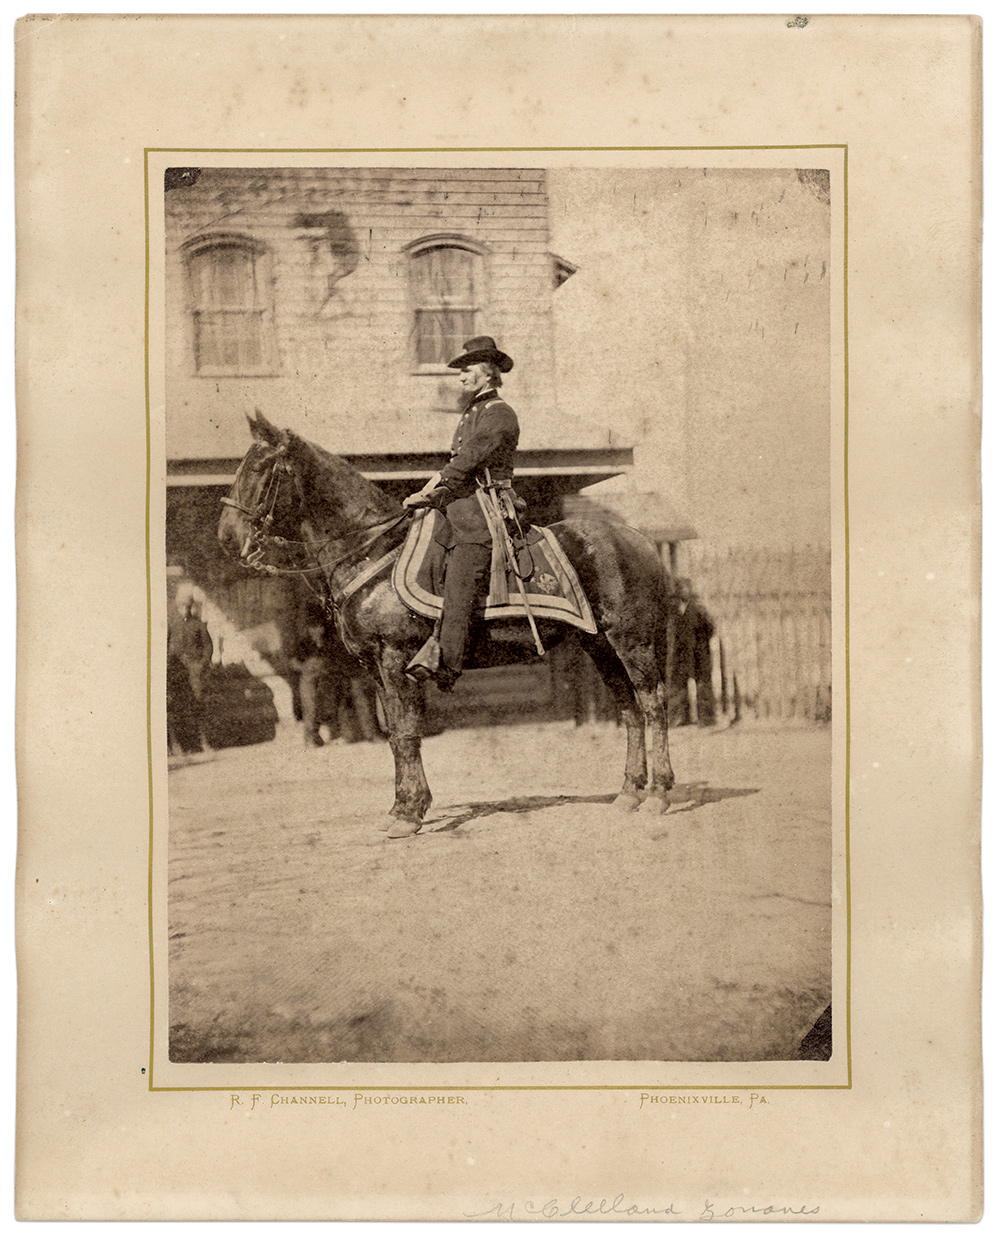 Major General Kelley. The horse may be “Philippi,” given to him by grateful townspeople of Wheeling after the 1861 battle. Albumen print by R.F. Channell of Phoenixville, Pa. Ronn Palm’s Museum of Civil War Images.